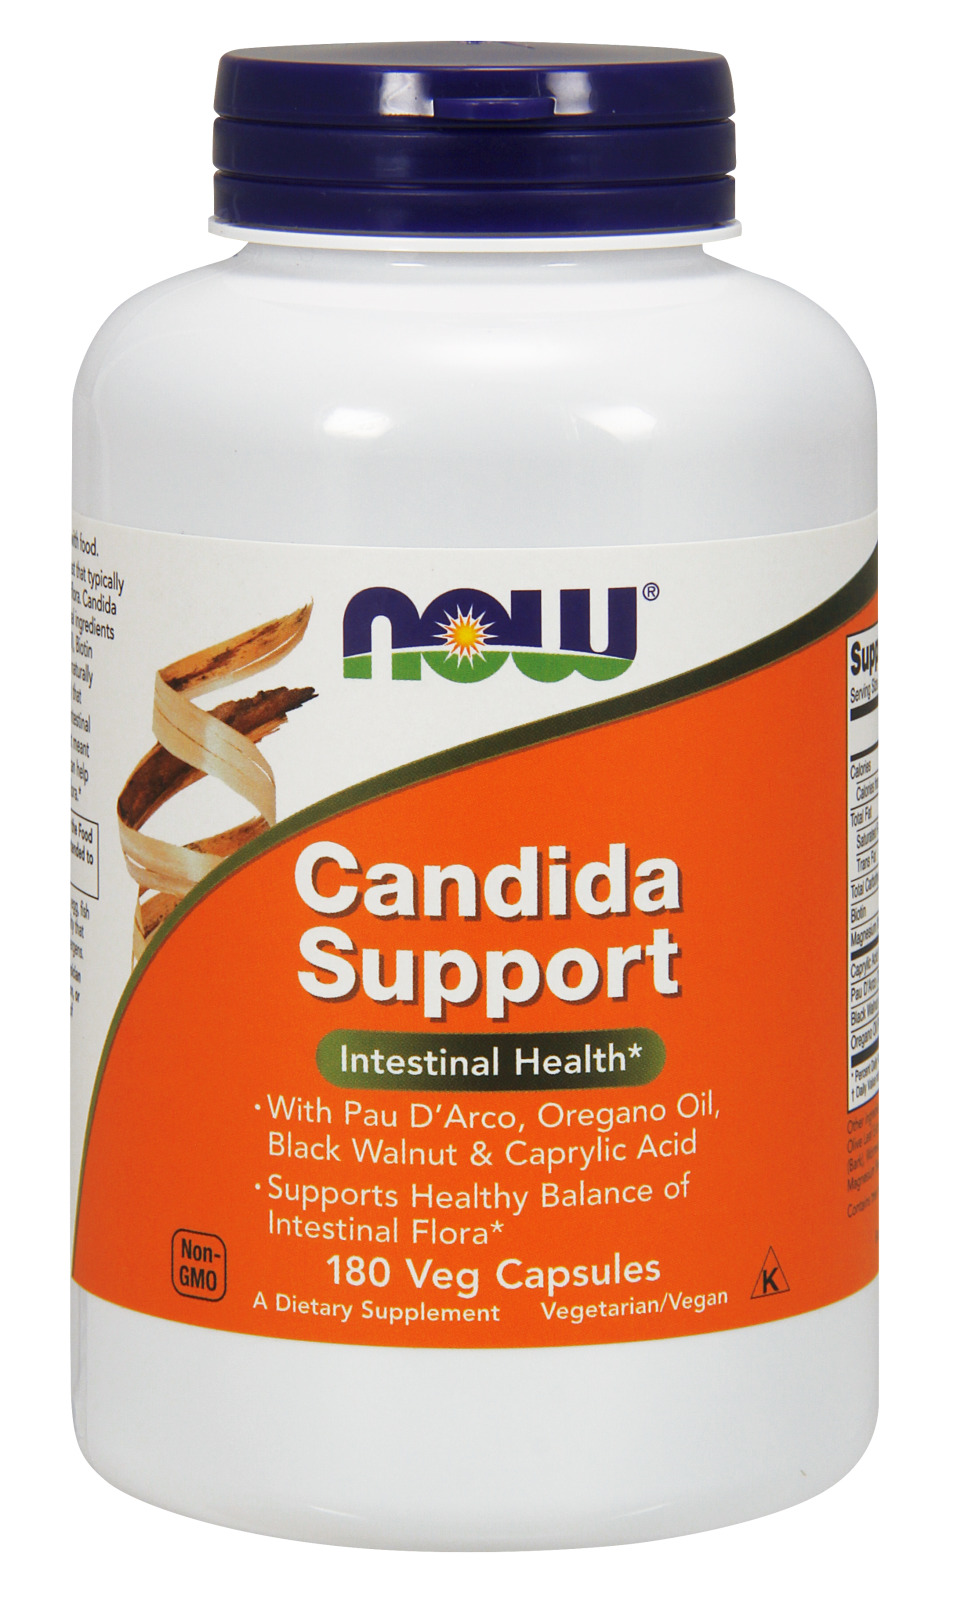 Candida Support Veg Capsules - The Daily Apple